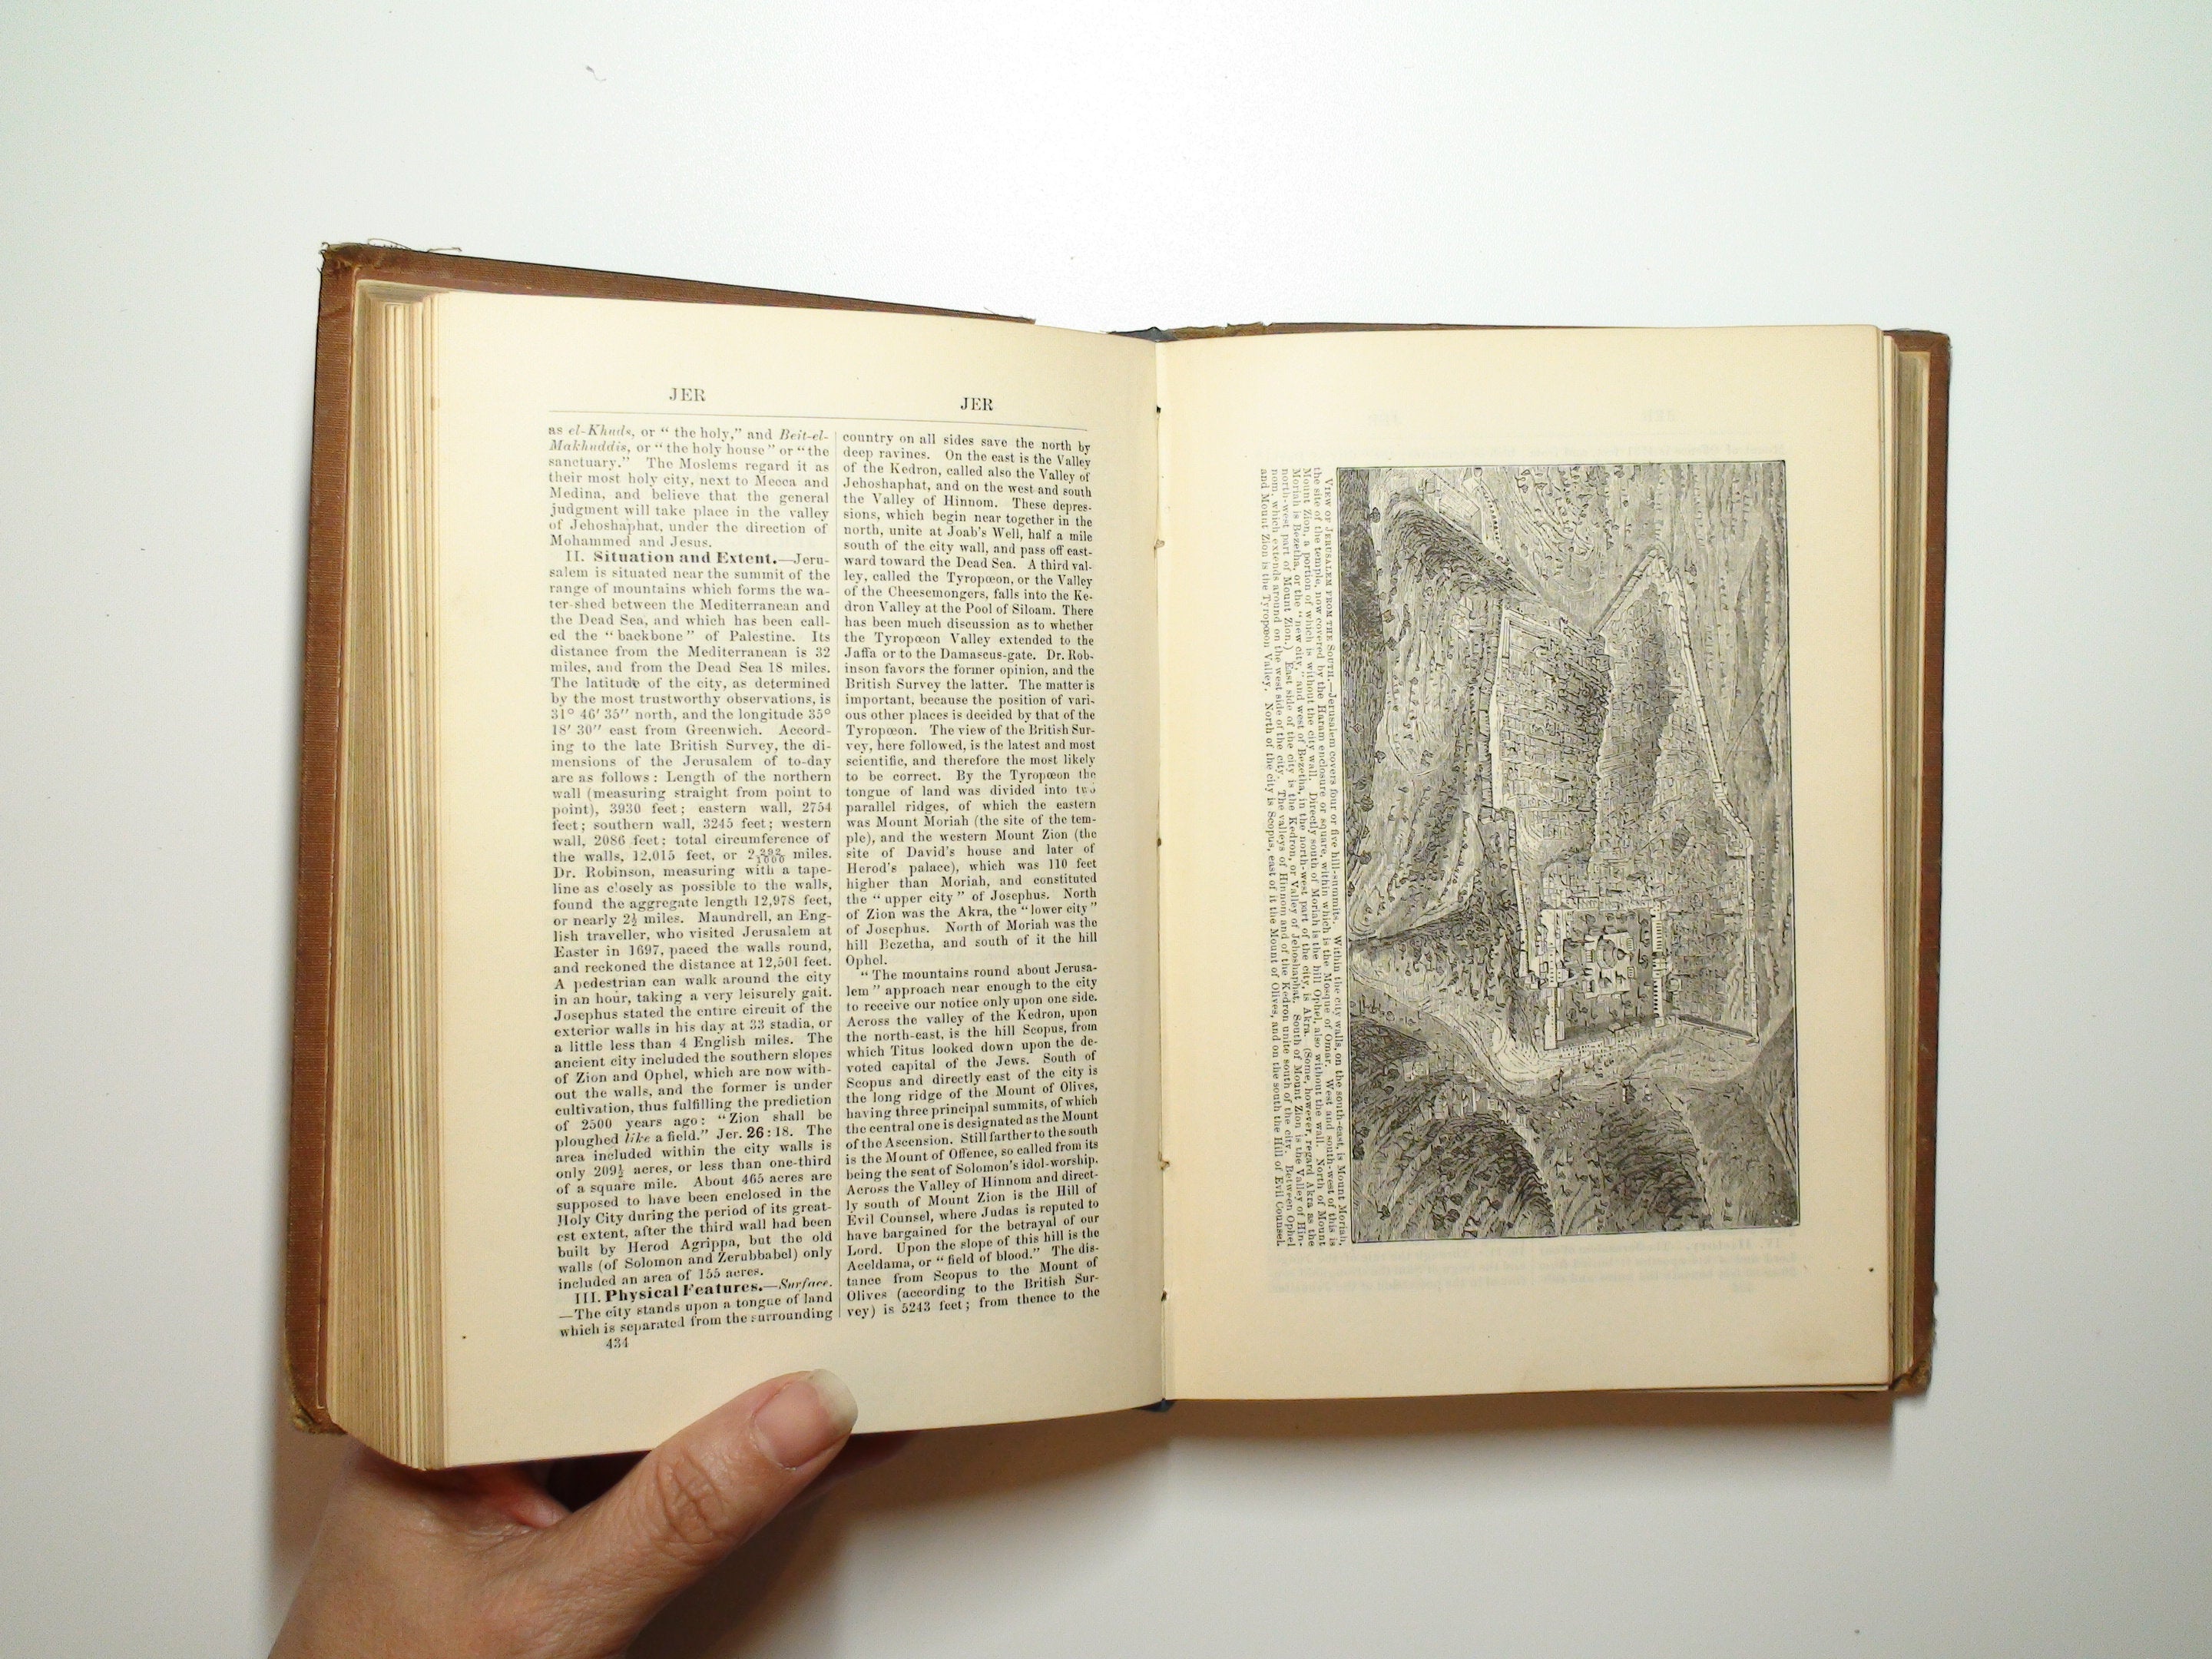 Dictionary of the Bible, Philip Schaff, Over 400 Illustrations, 1st Ed., 1880